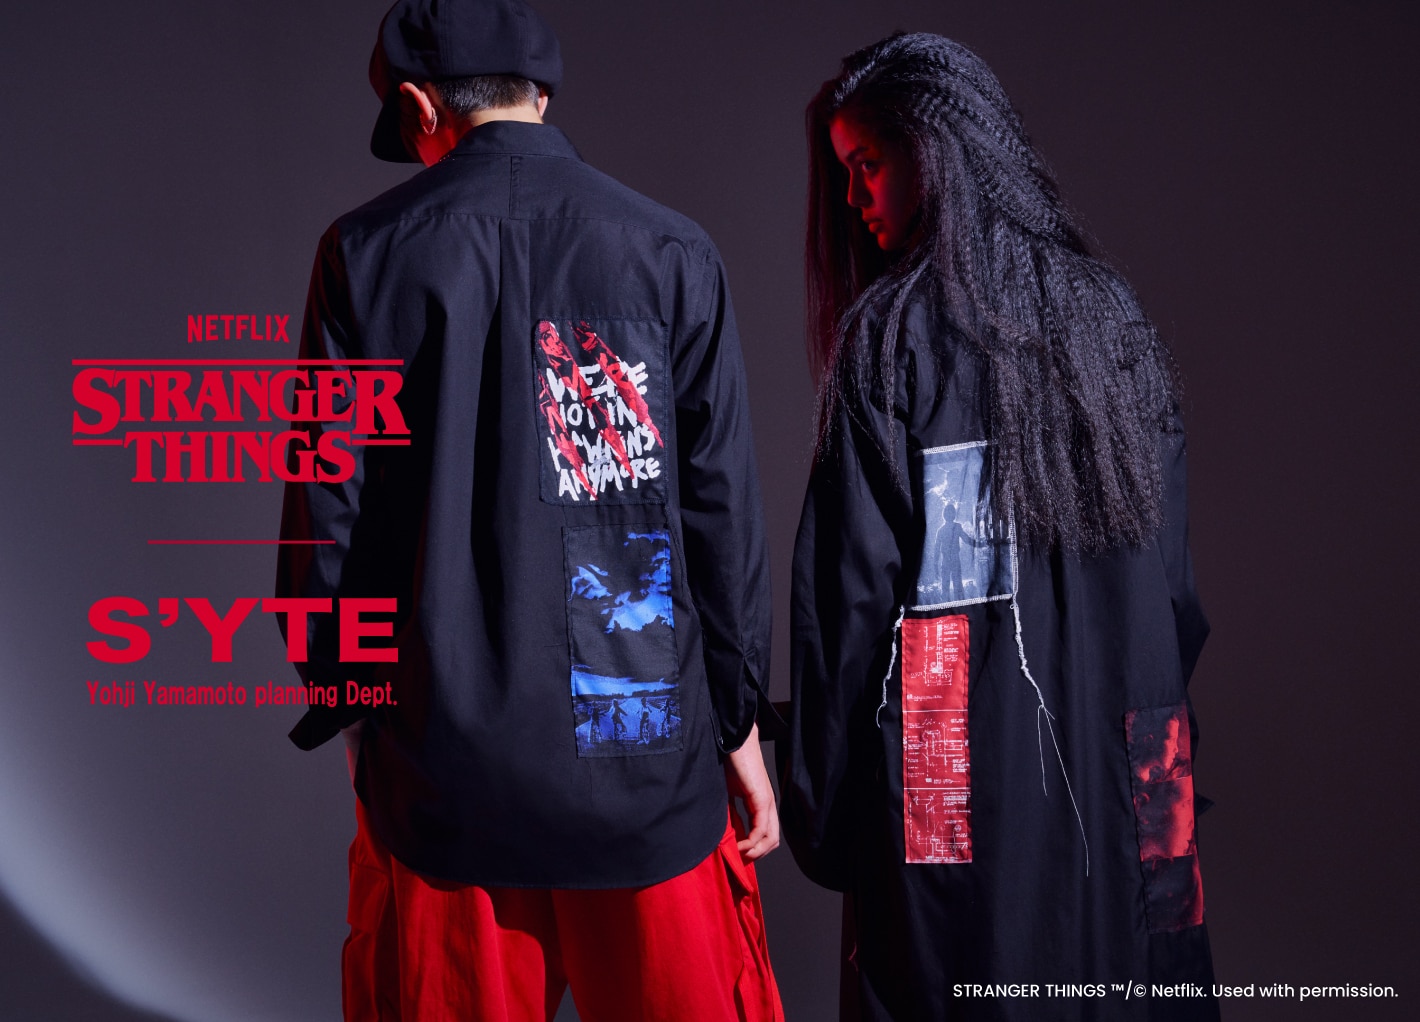 S’YTE×STRANGER THINGS COLLECTION